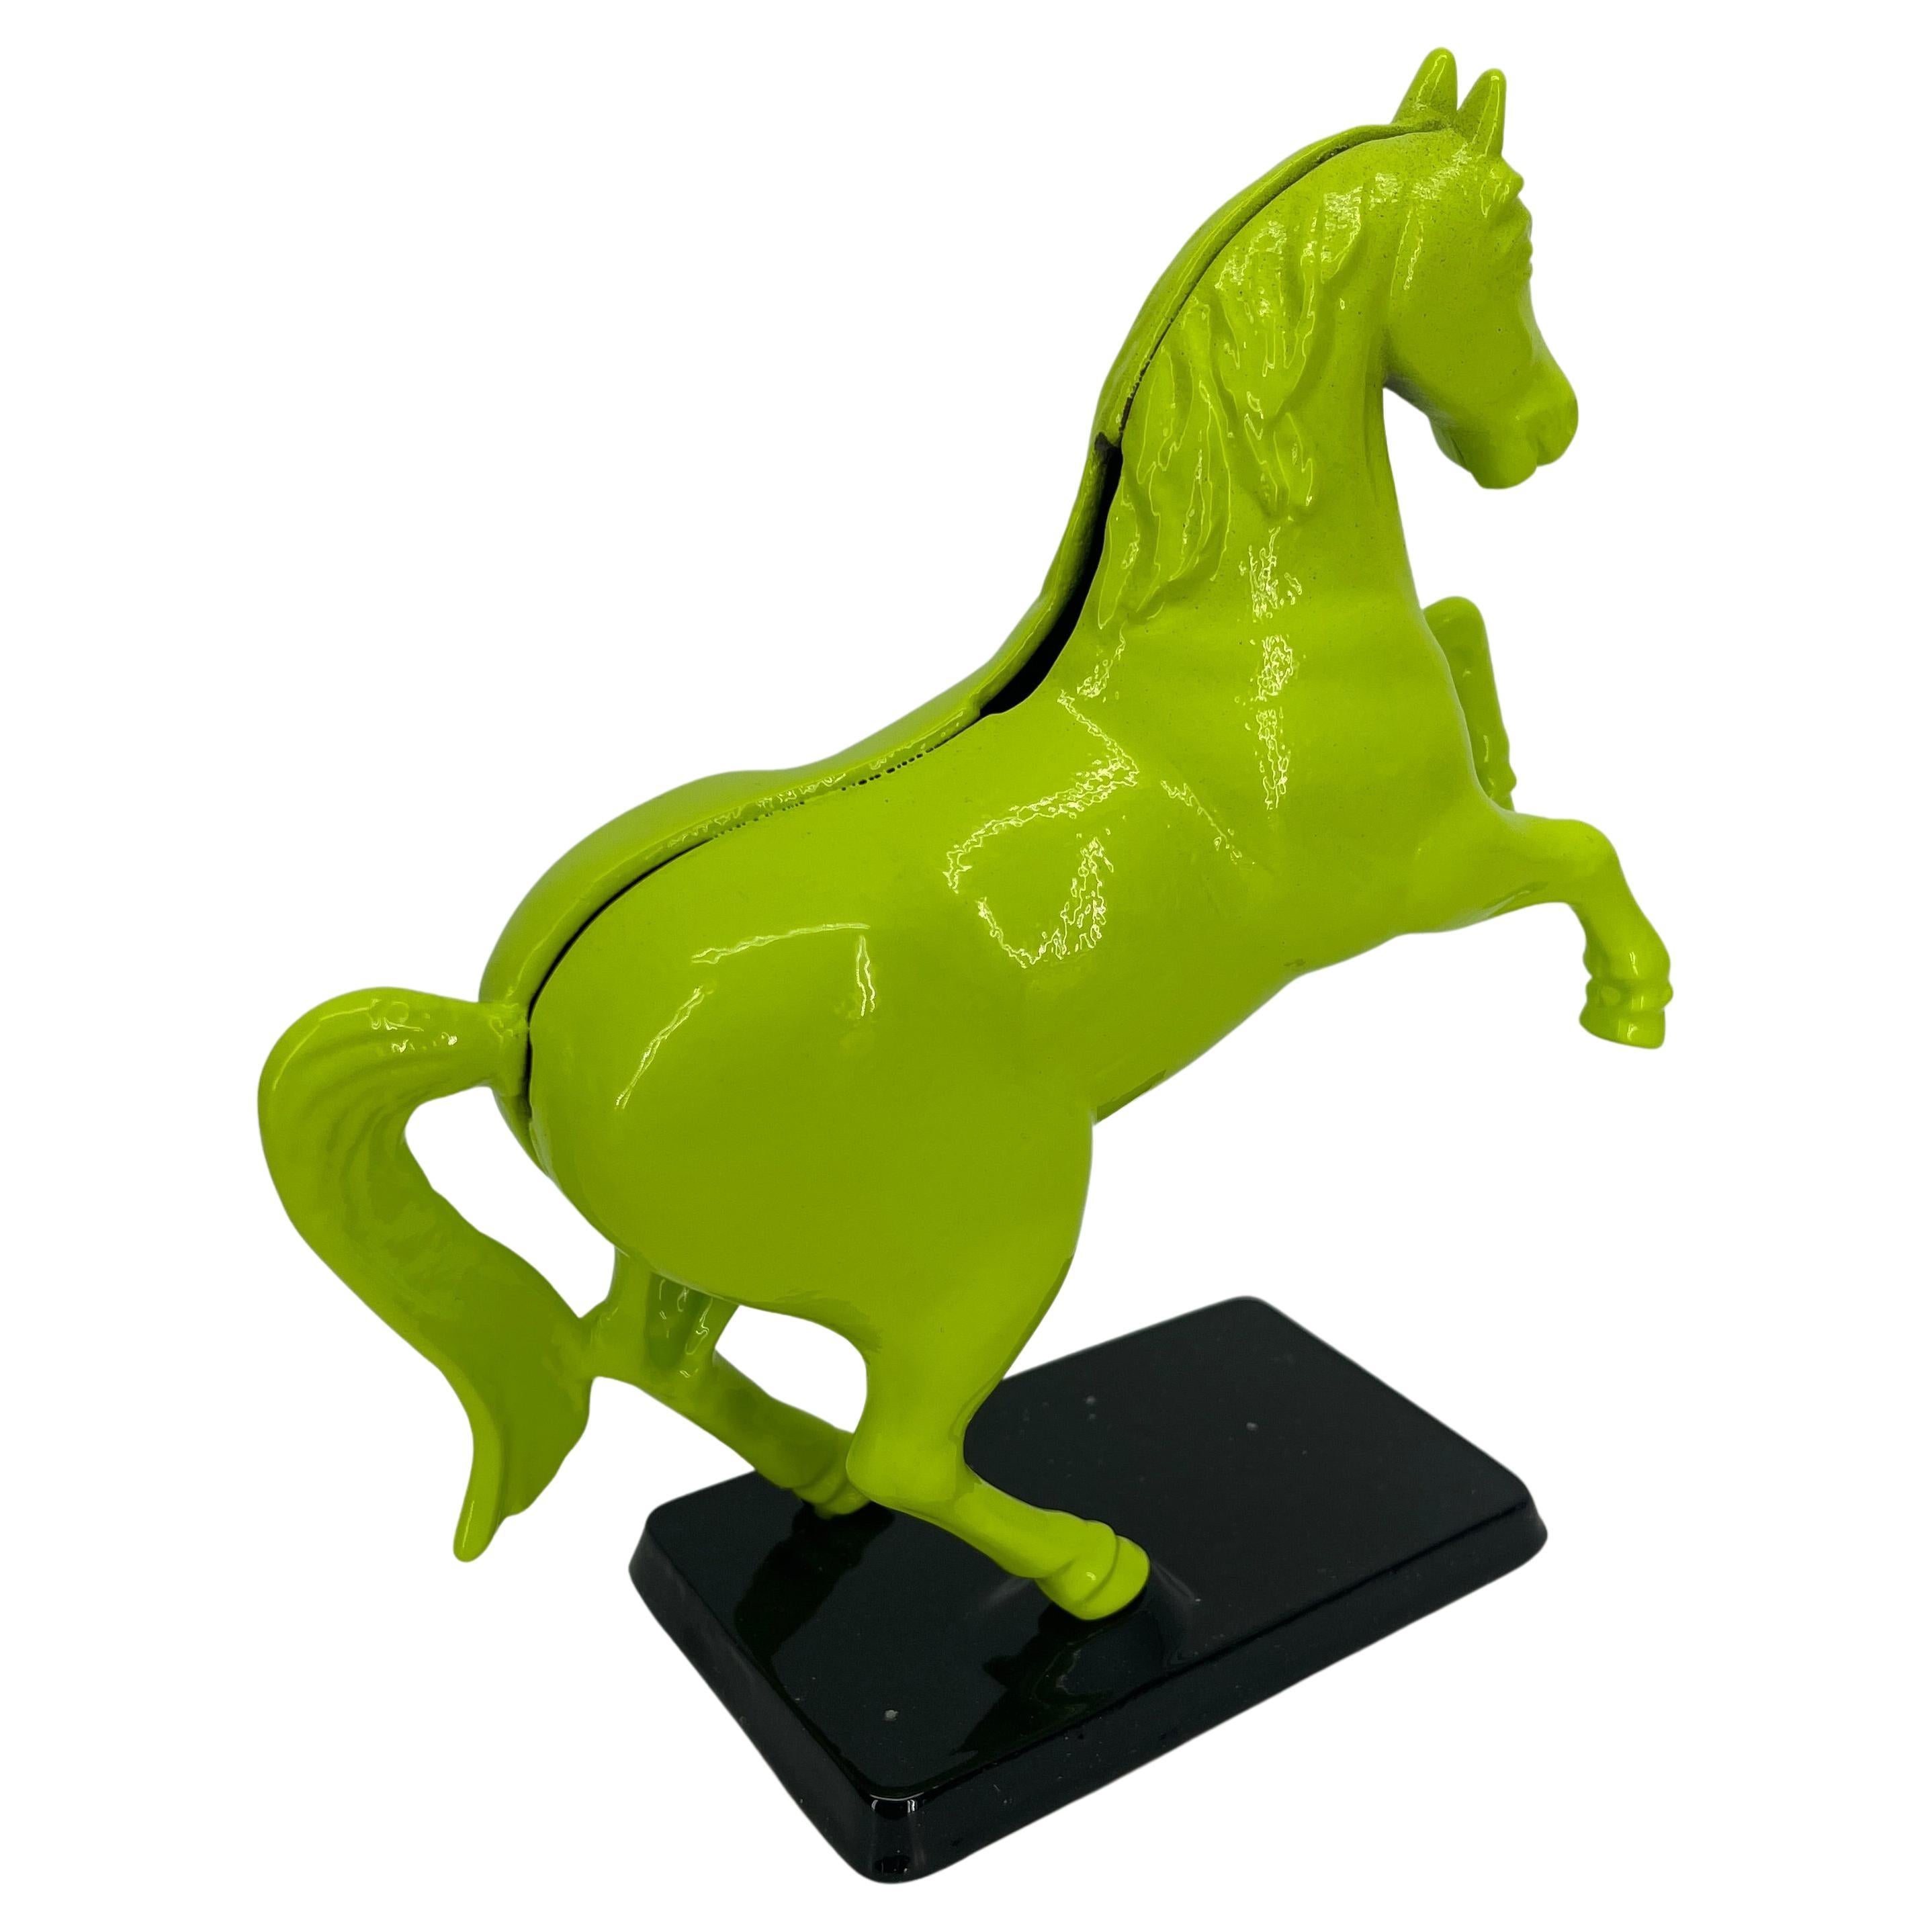 Vintage cast iron money bank horse sculpture. The money bank is mounted on a black base. The horse stands proudly on it's stand. Shining in newly powder coated chartreuse and jet black, the bank is an exciting addition to a bookcase or as a desk